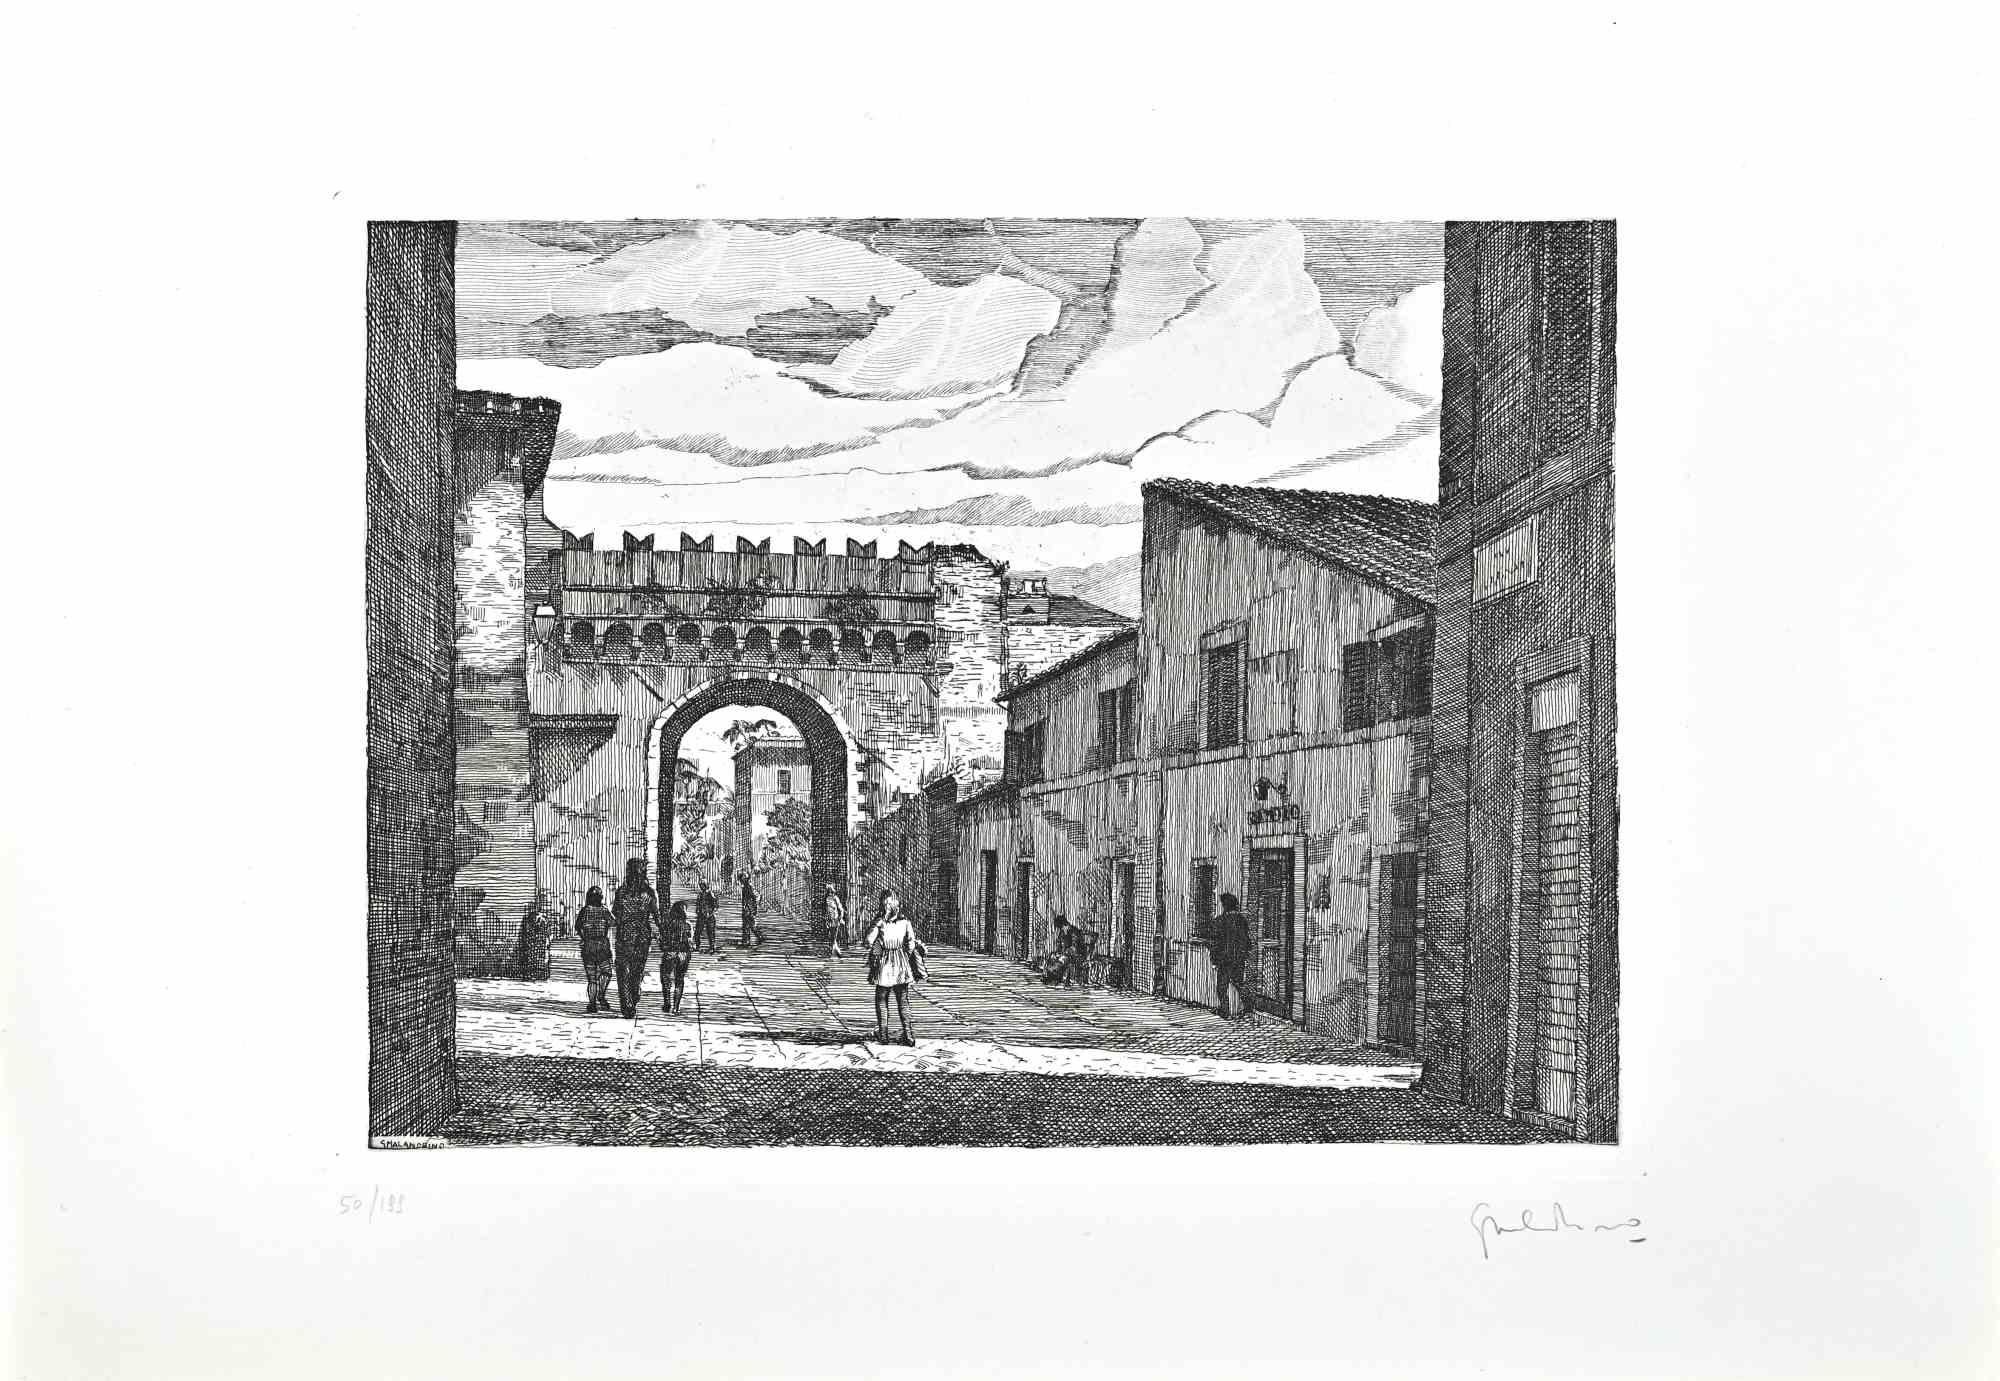 Borgo Pio - Rome is an original artwork realized by Giuseppe Malandrino.

Original print in etching technique.

Hand-signed by the artist in pencil on the lower right corner.

Numbered n. 50/199 edition on the lower left corner.

Good conditions.